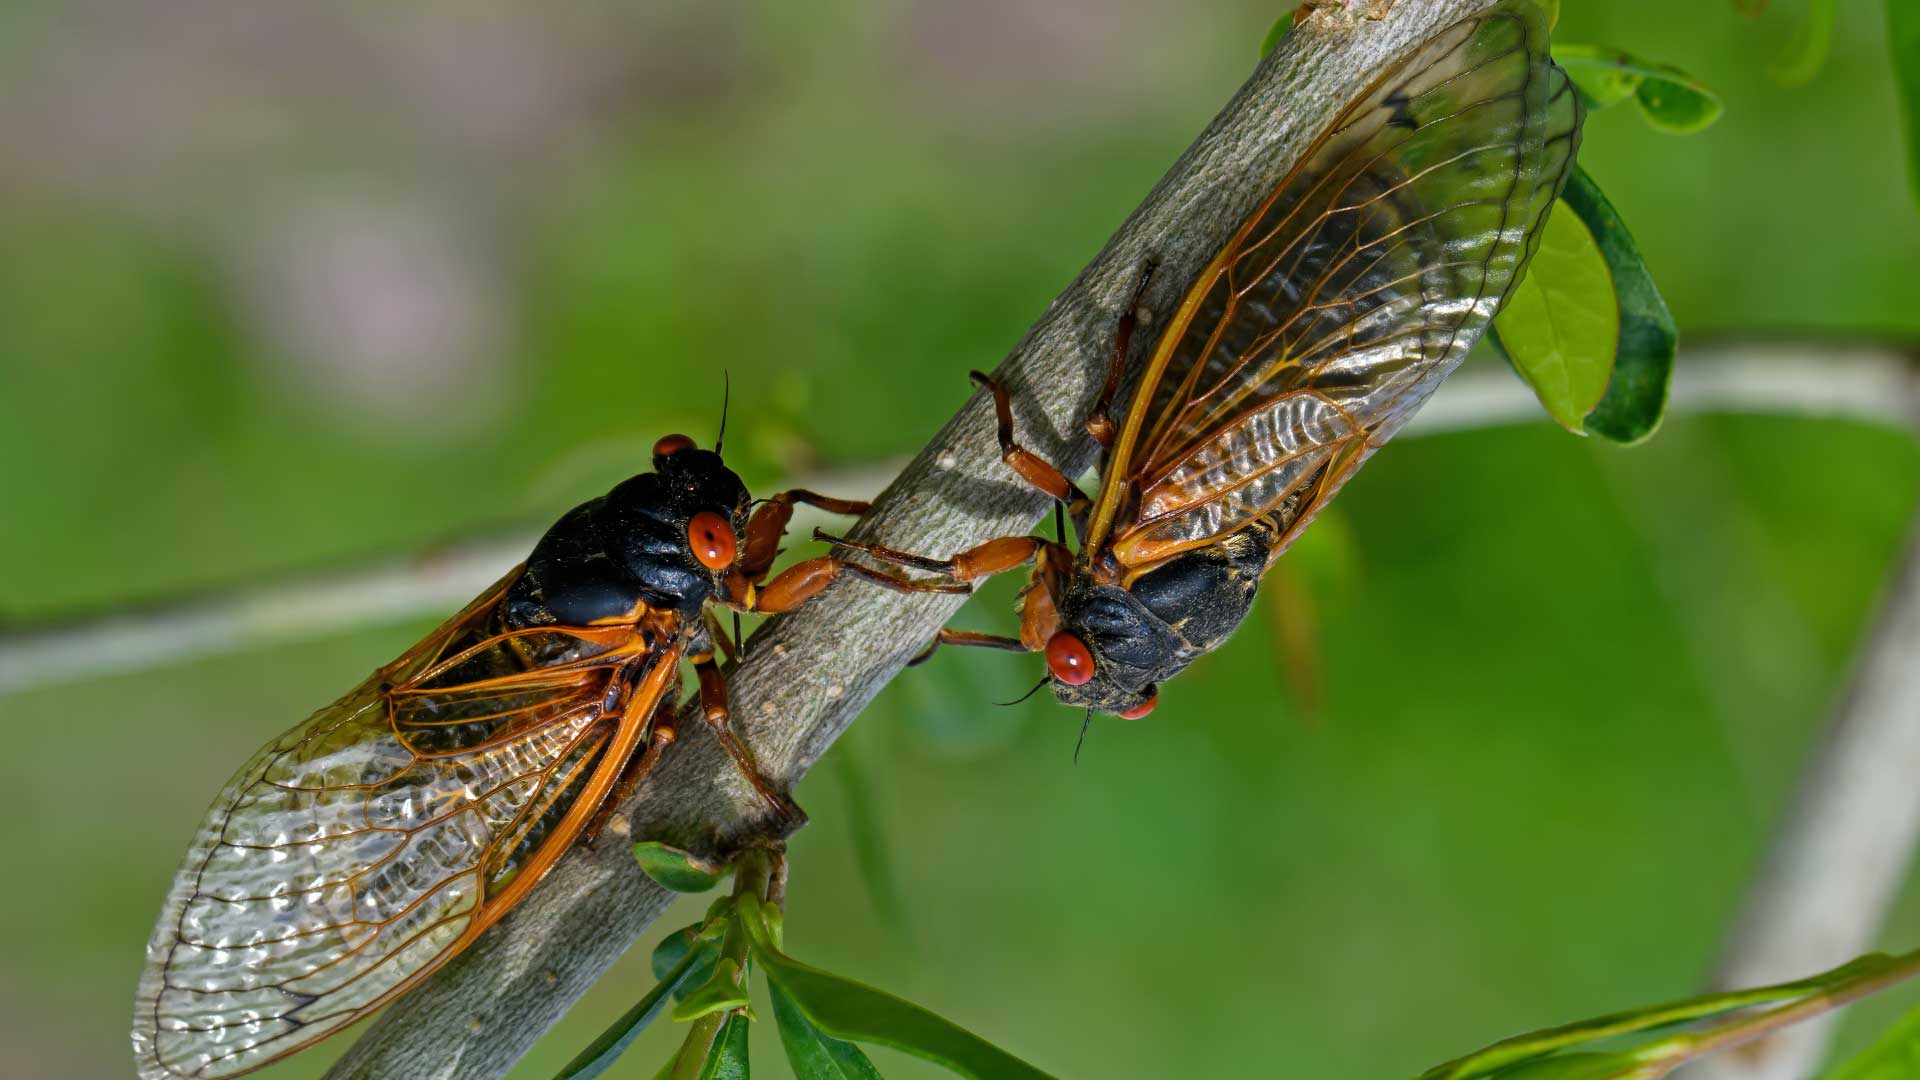 Two periodical cicadas cling to a branch.